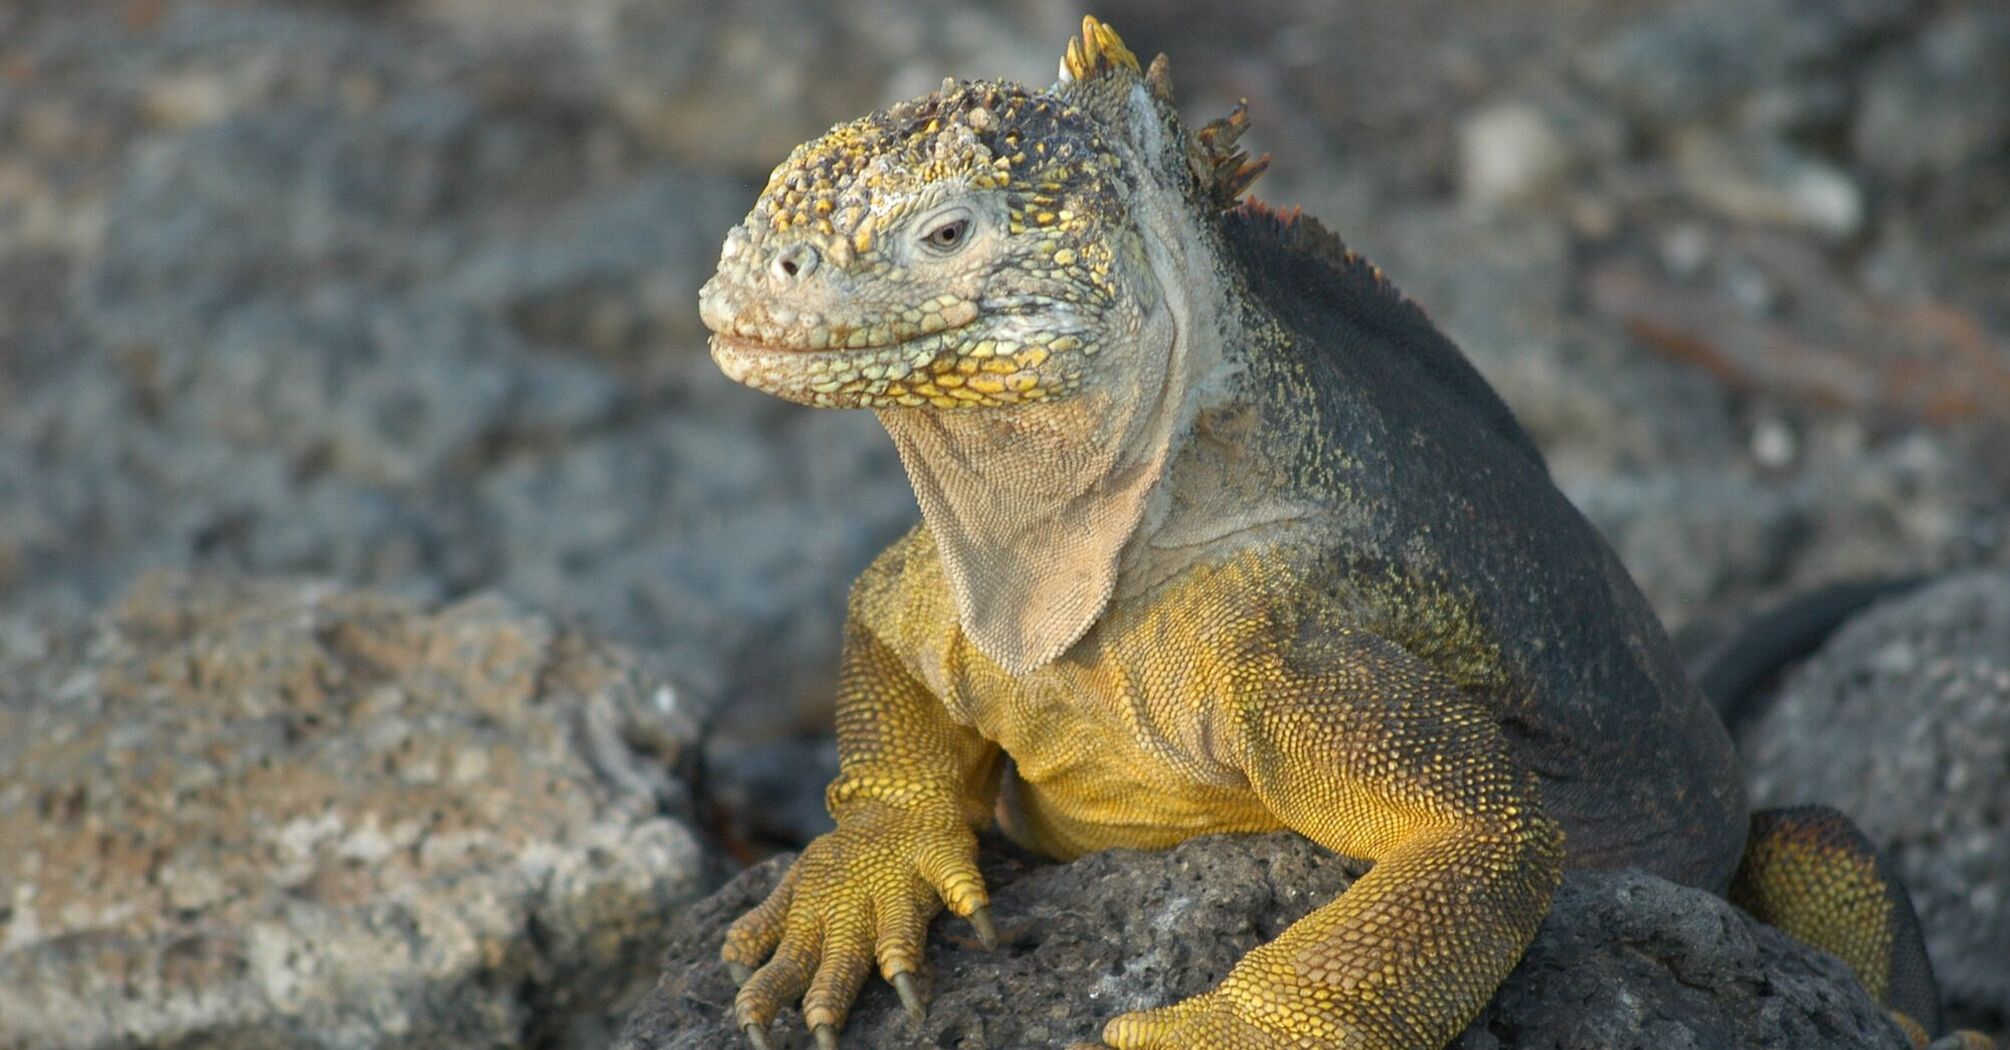 A land iguana perched on a rocky surface in the Galapagos Islands